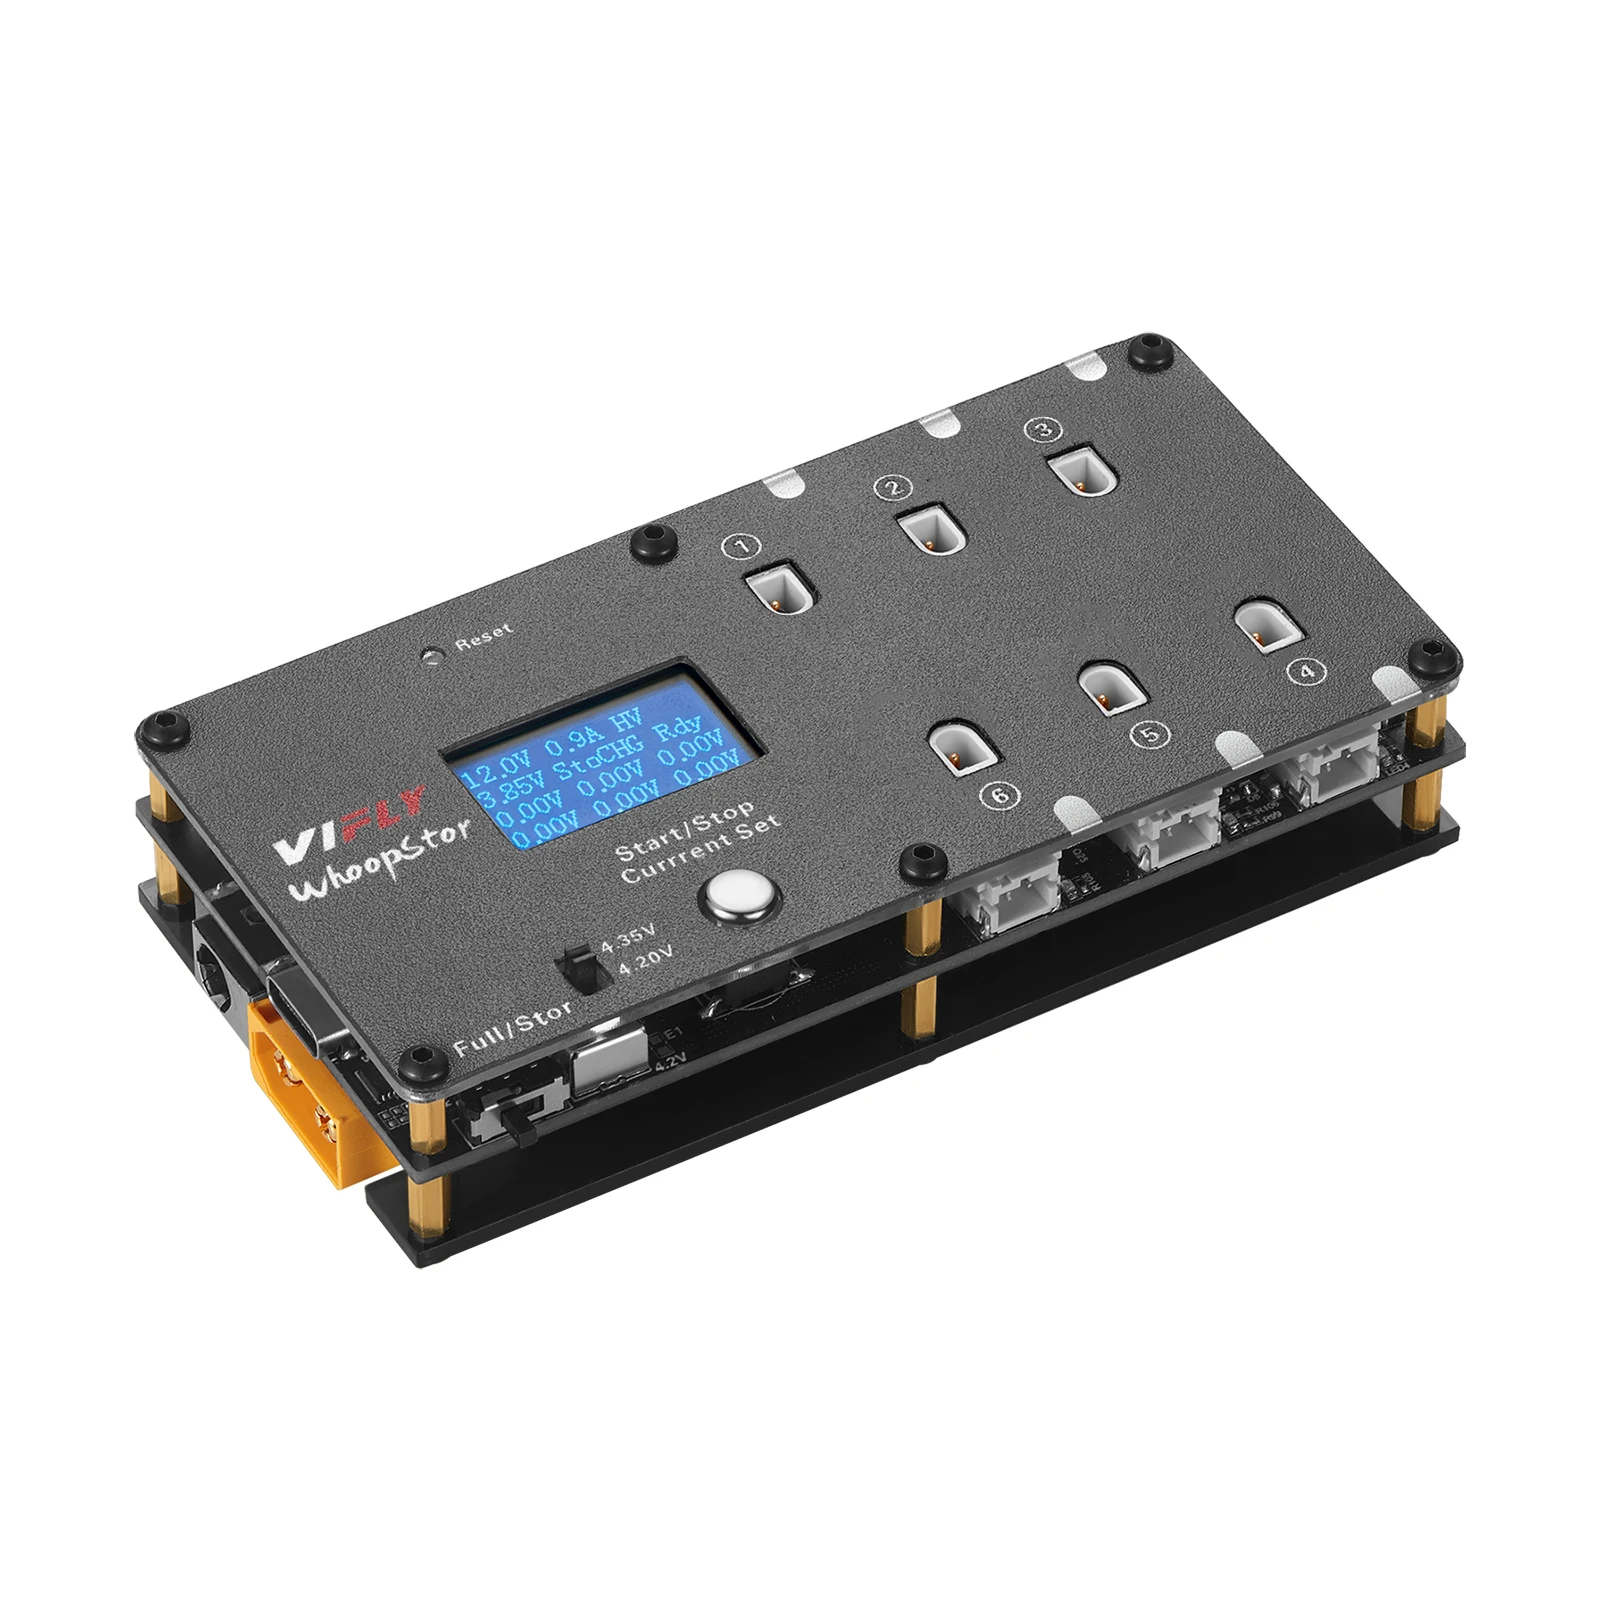 VIFLY WhoopStor V2 6 Ports 1S Battery Charger